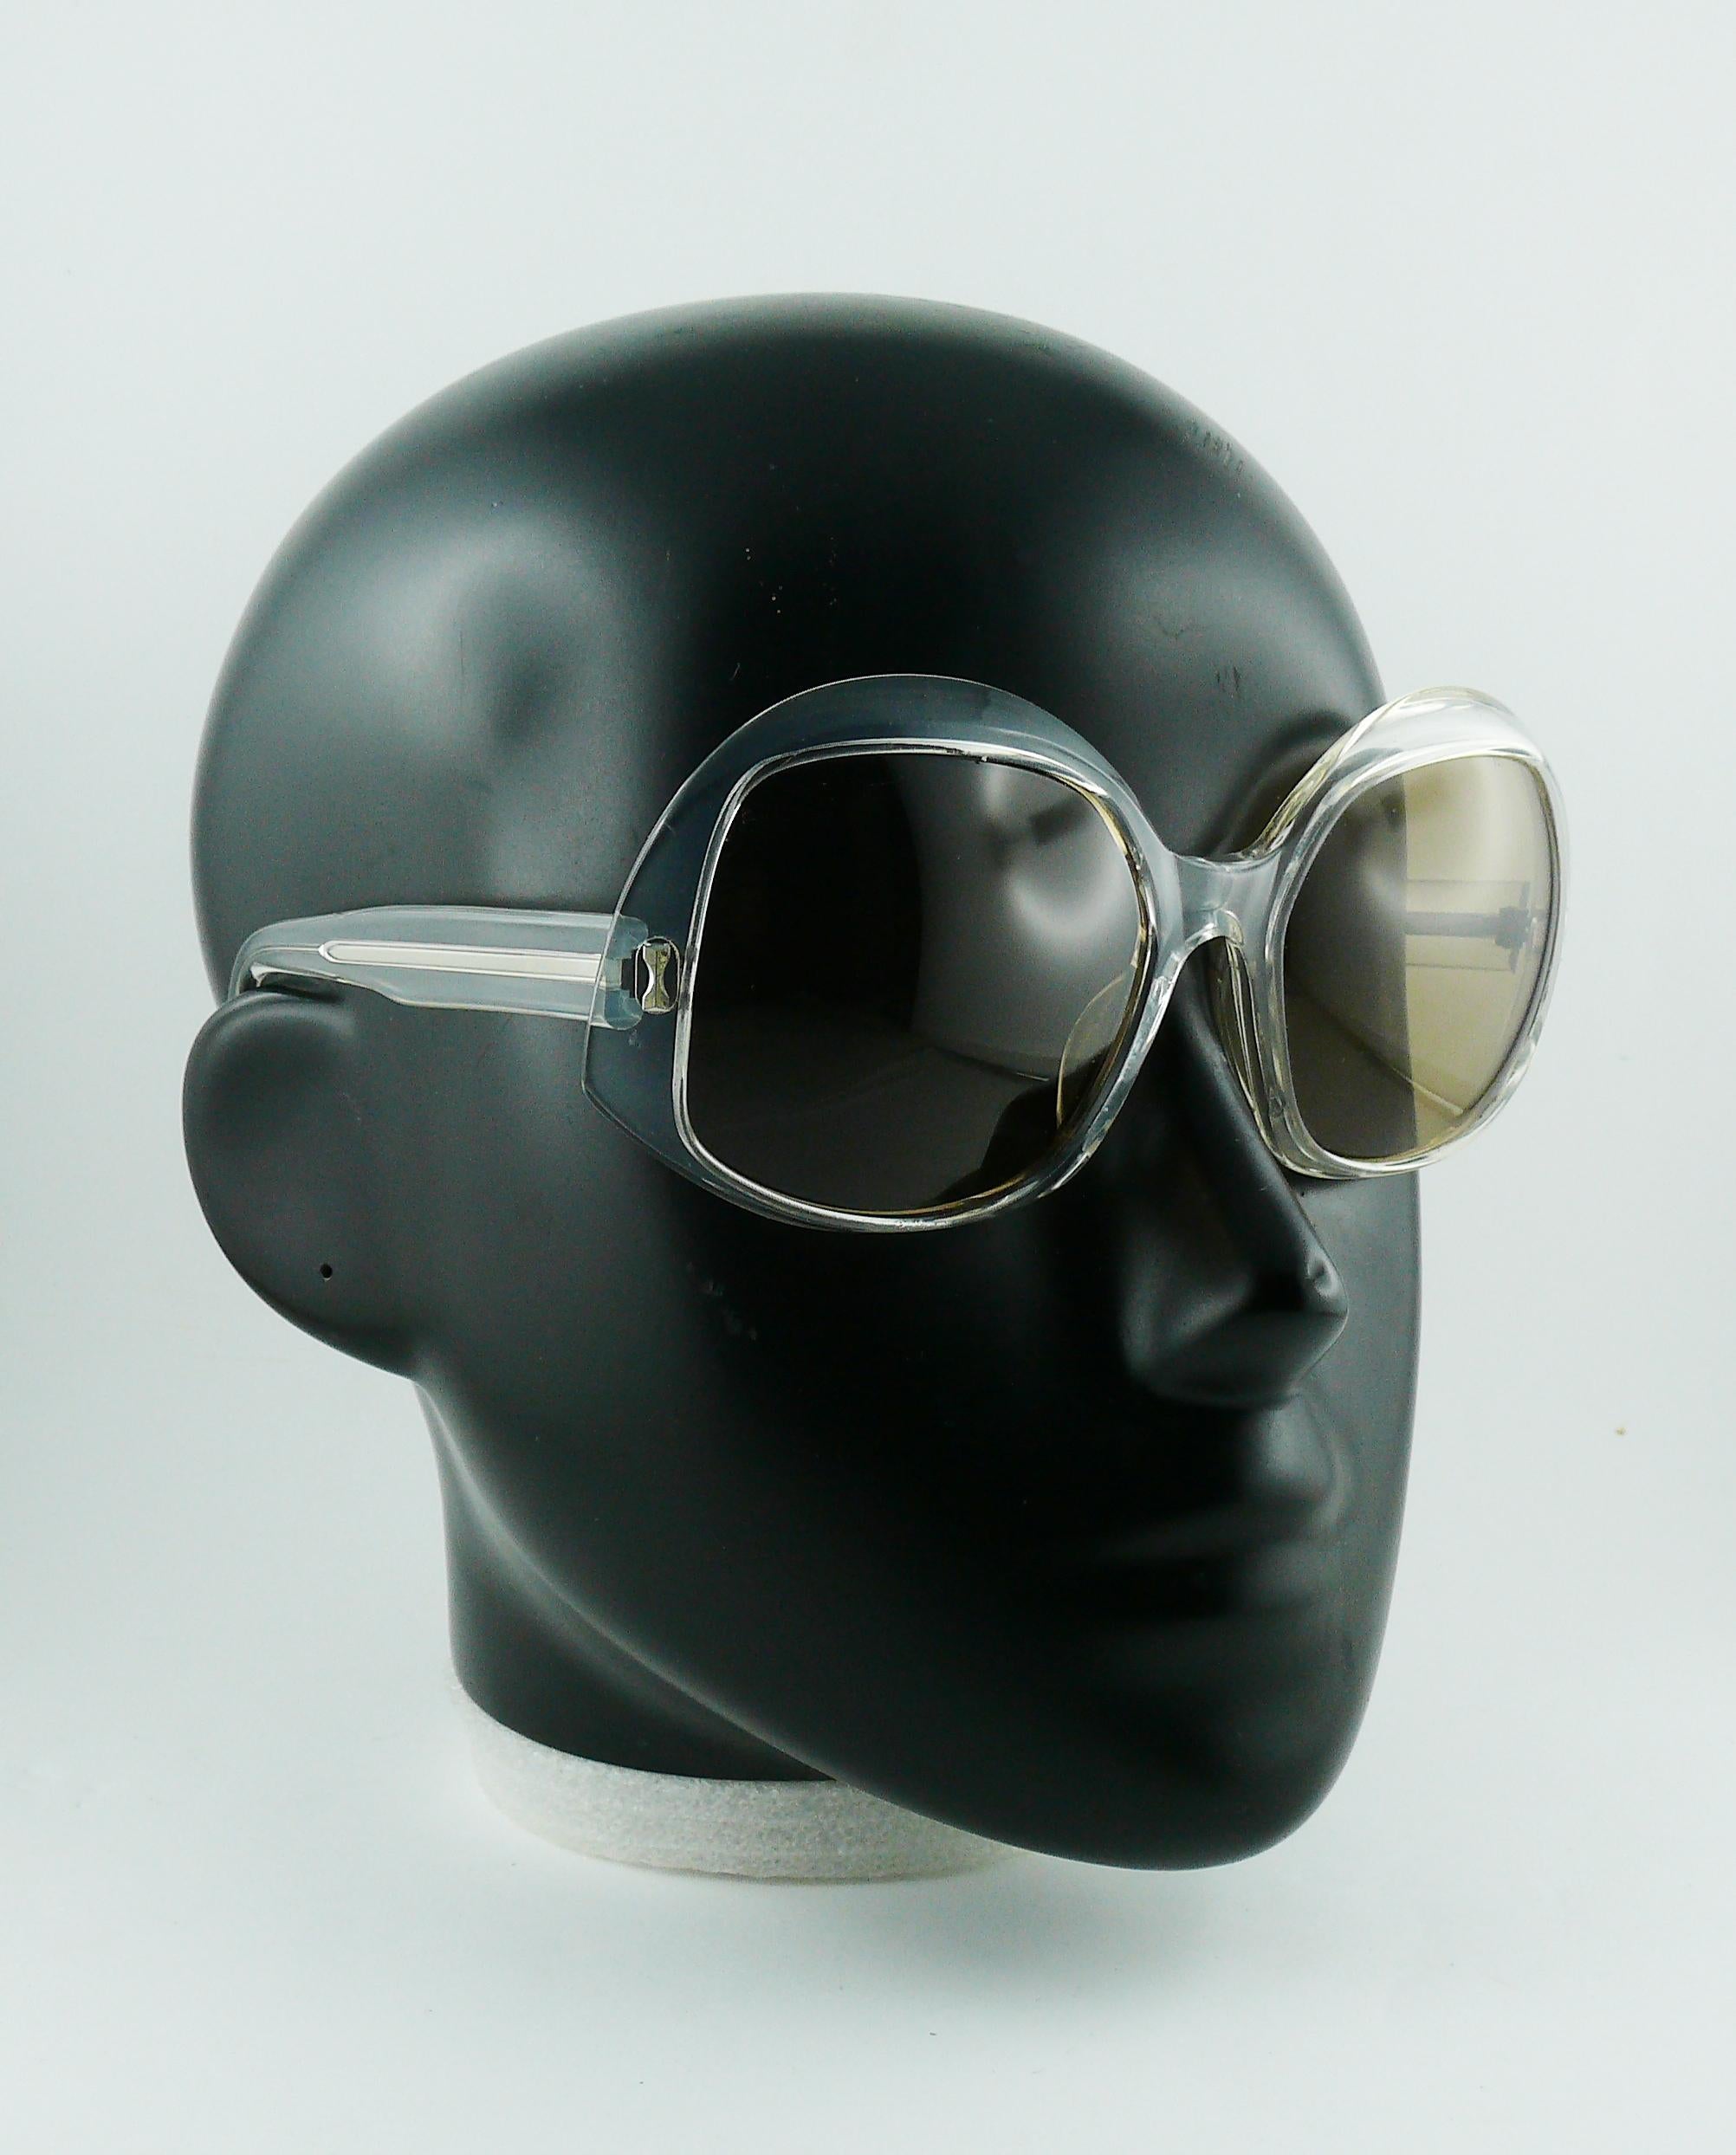 PIERRE MARLY vintage WEEK-END sunglasses featuring clear frame/temples and smoked lenses.

Embossed WEEK-END PIERRE MARLY.

Indicative measurements : max. width approx. 15 cm (5.91 inches) / width between lenses approx. 1 cm (0.39 inch) / lenses